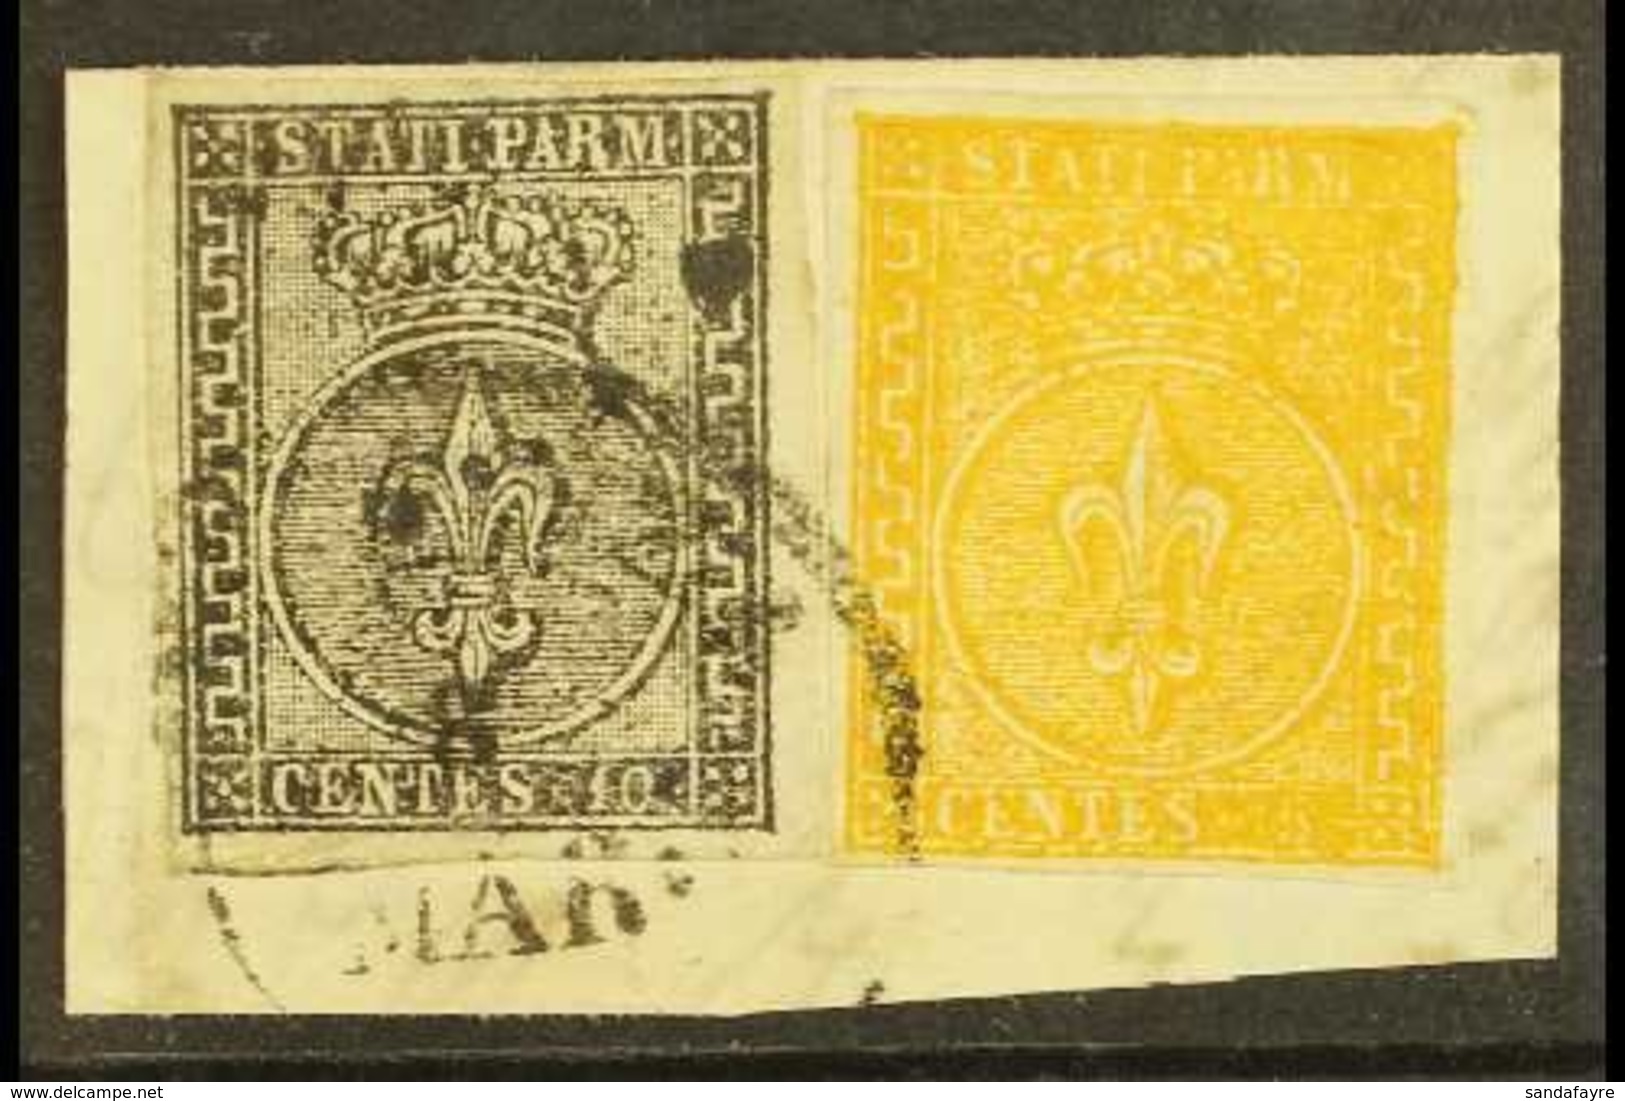 PARMA  1852 10c Black On White And 1853 5c Orange Yellow, Sass 2+6, Very Fine Used Together On Piece Tied By Piacenza 6  - Unclassified